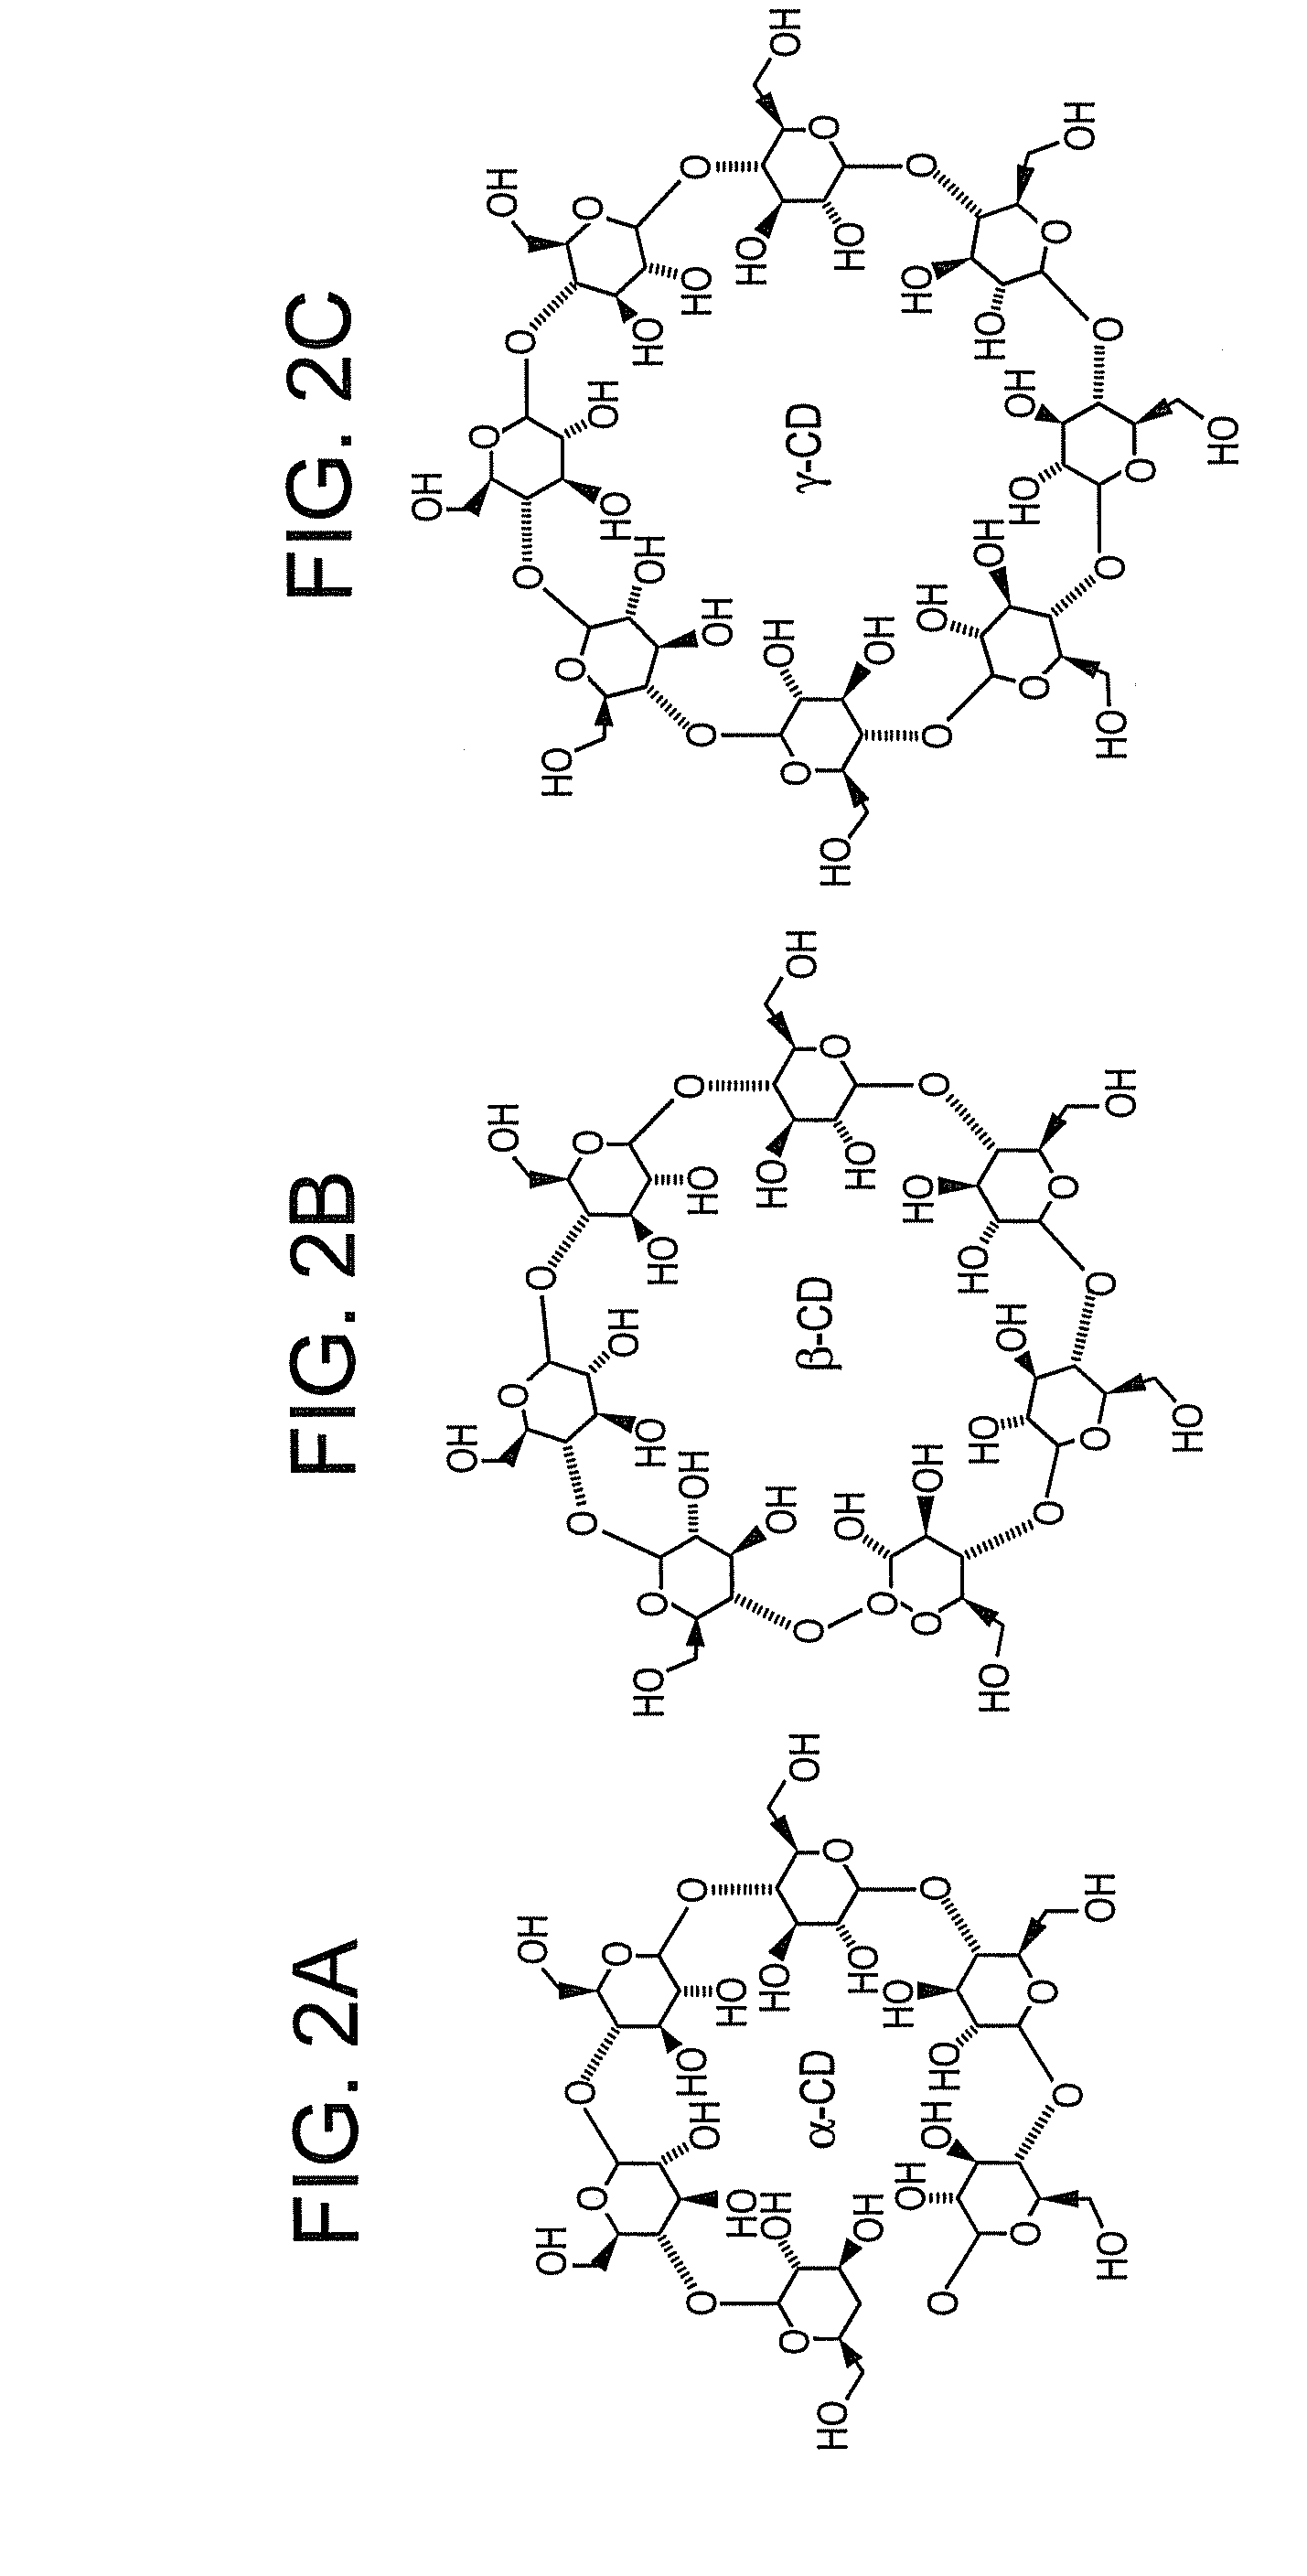 Catalyst and method of manufacture